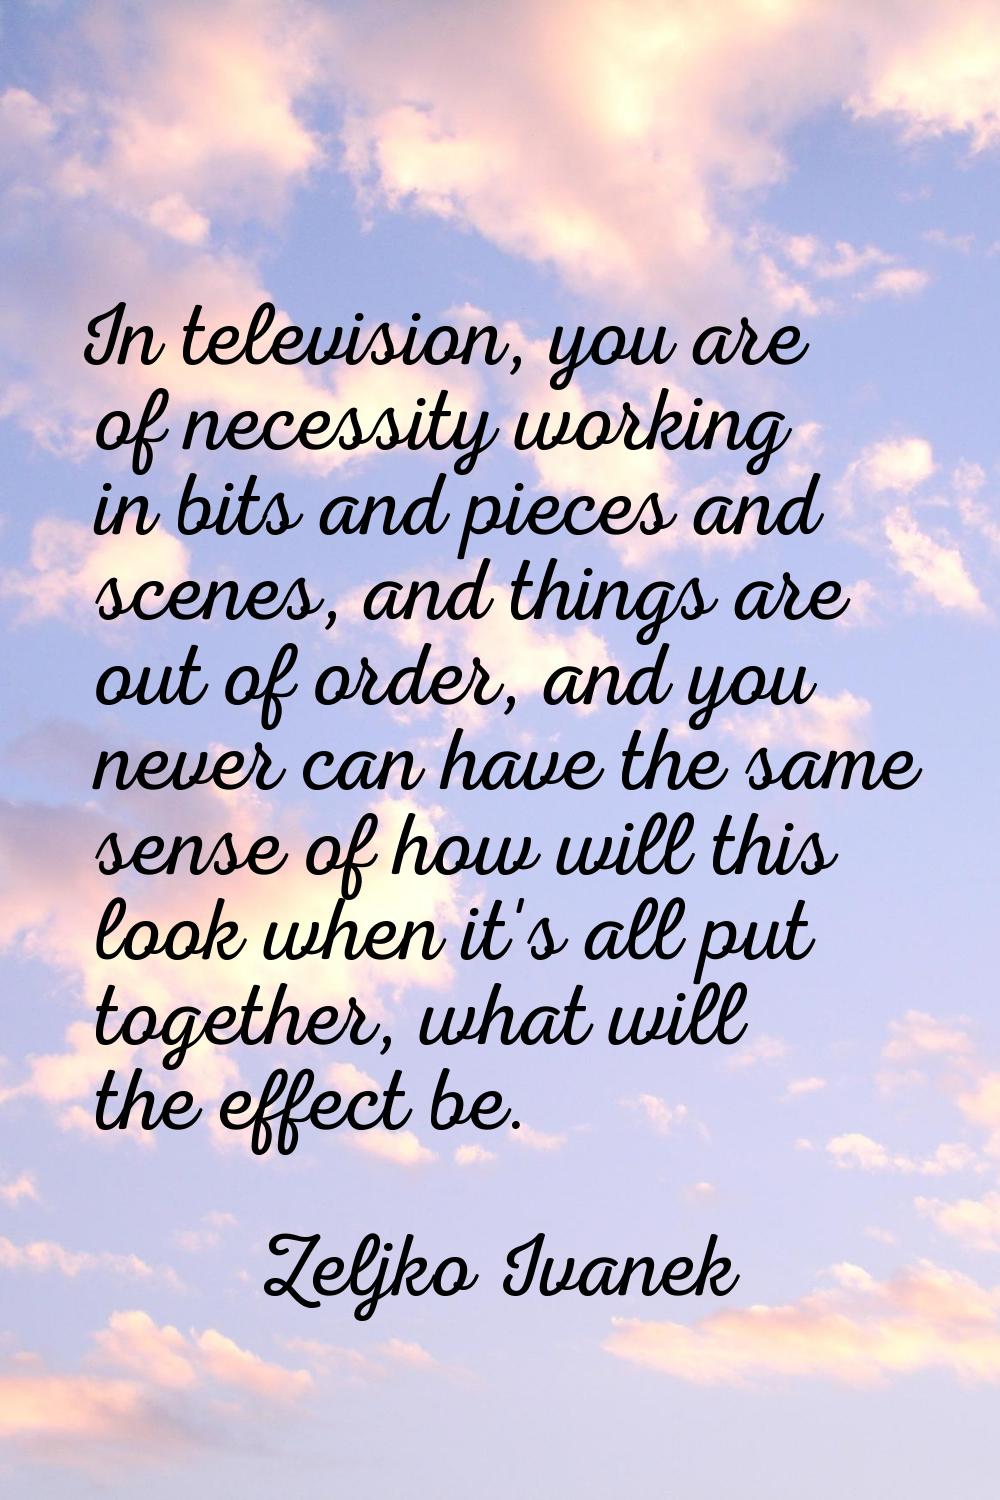 In television, you are of necessity working in bits and pieces and scenes, and things are out of or